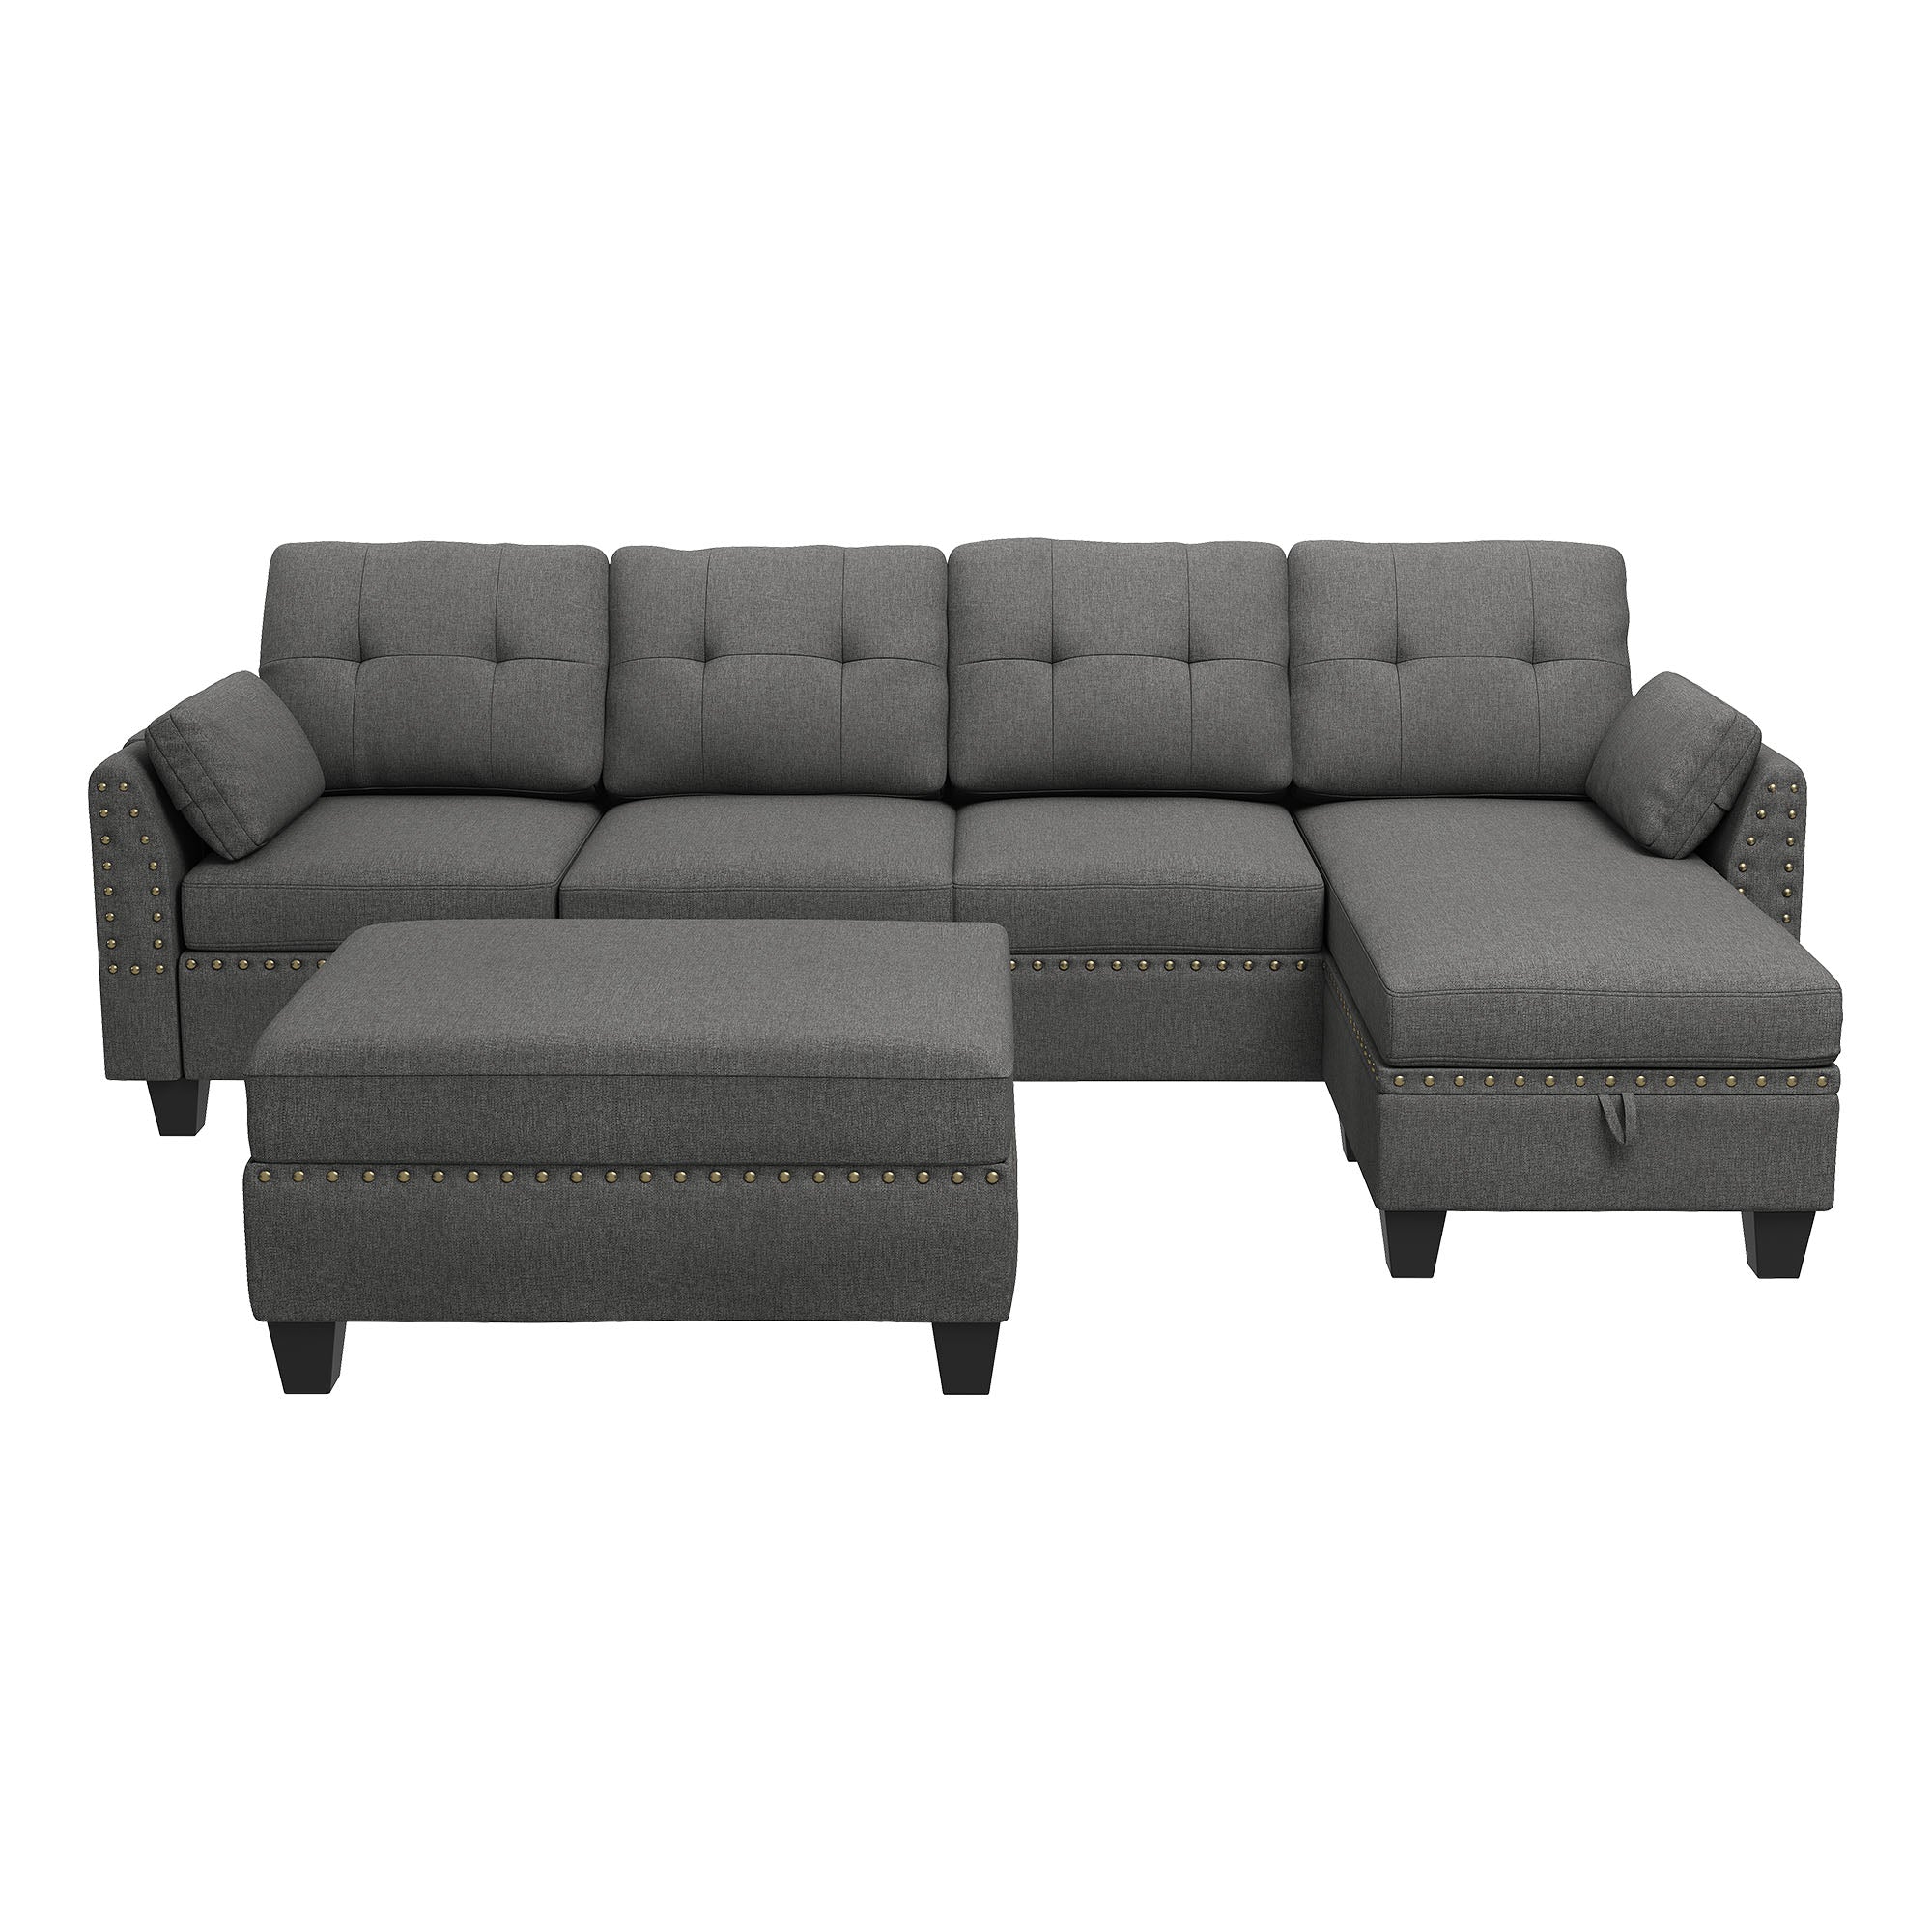 HONBAY 4-Seat L-Shaped Sectional Sofa with Storage Ottoman Set